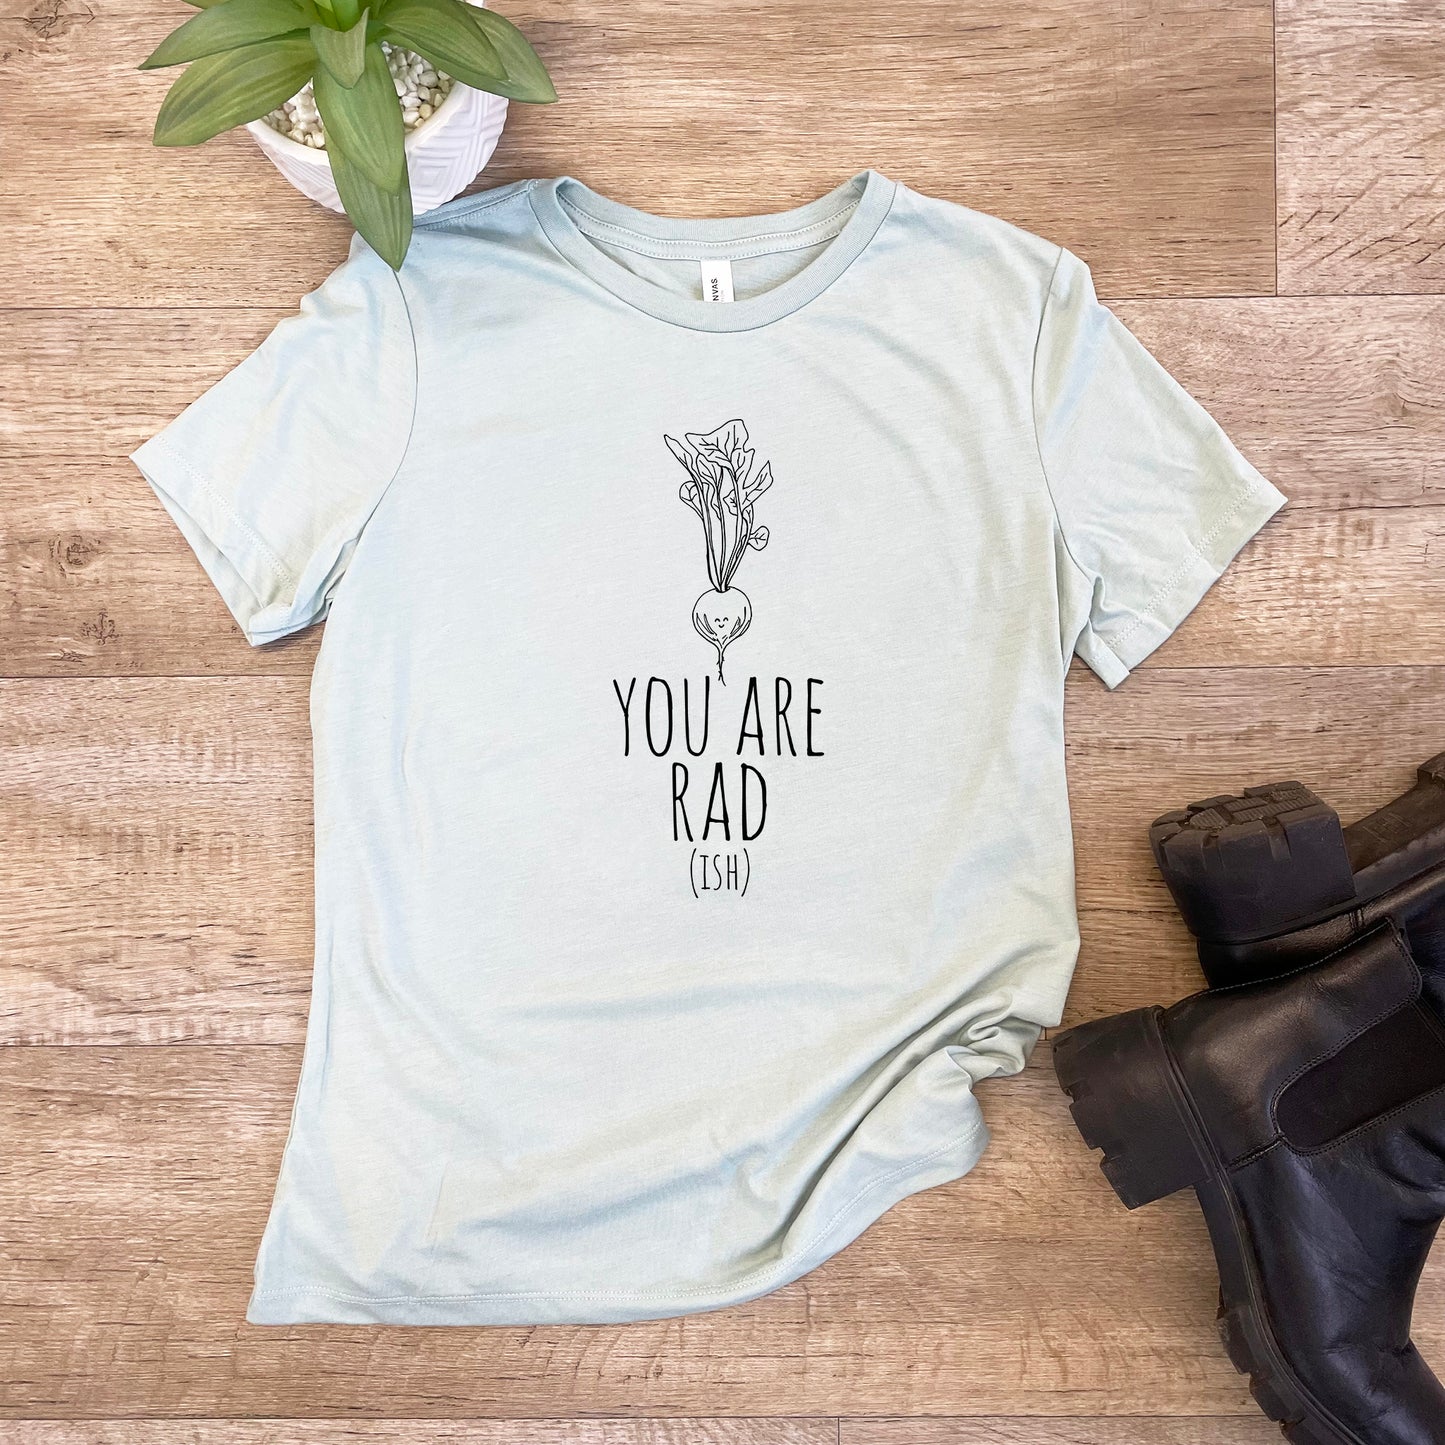 You Are Rad(ish) - Women's Crew Tee - Olive or Dusty Blue